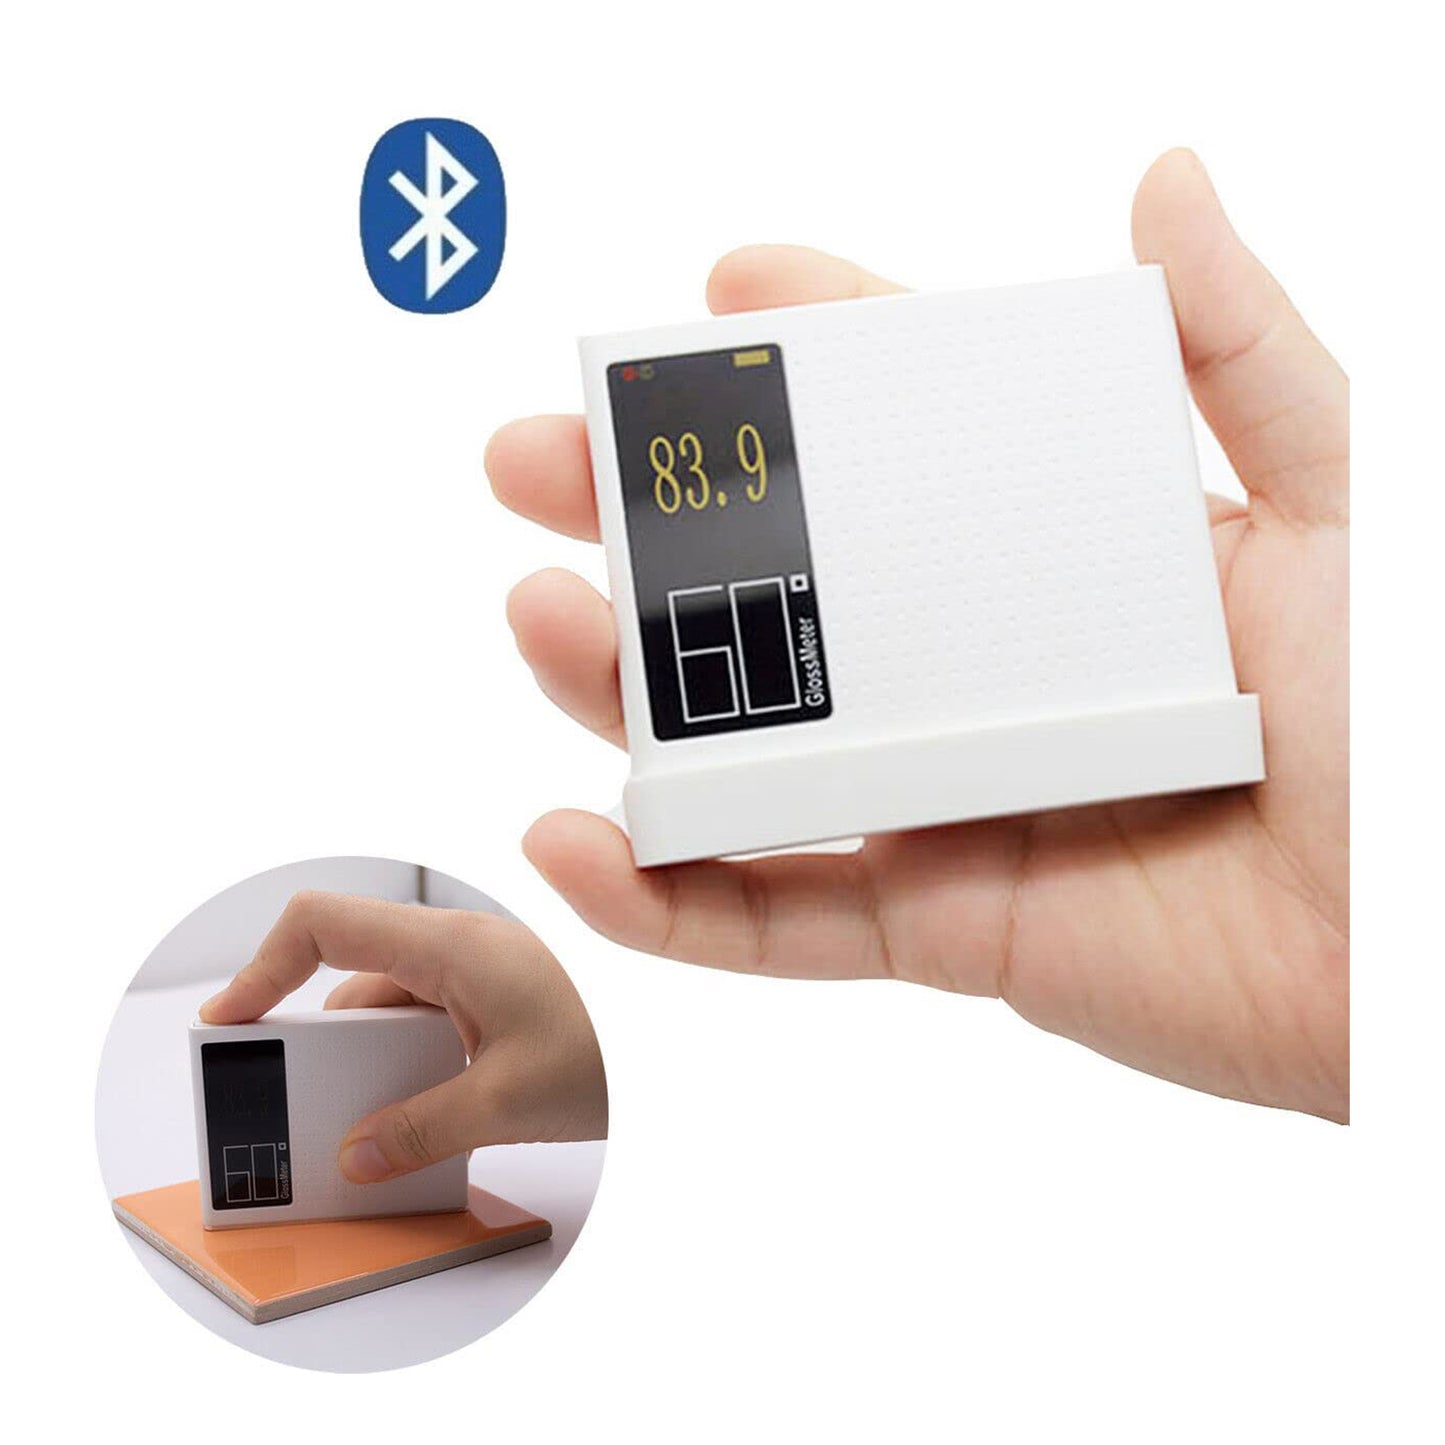 VTSYIQI Gloss Meter Glossmeter 60 Degree Surface Gloss Measurement Meter With Auto Calibration Measure Range 0 to 1000GU Resolution 0.1% for Paint Glass Cellphone Ceramics Automobile Hardware Plastic Etc